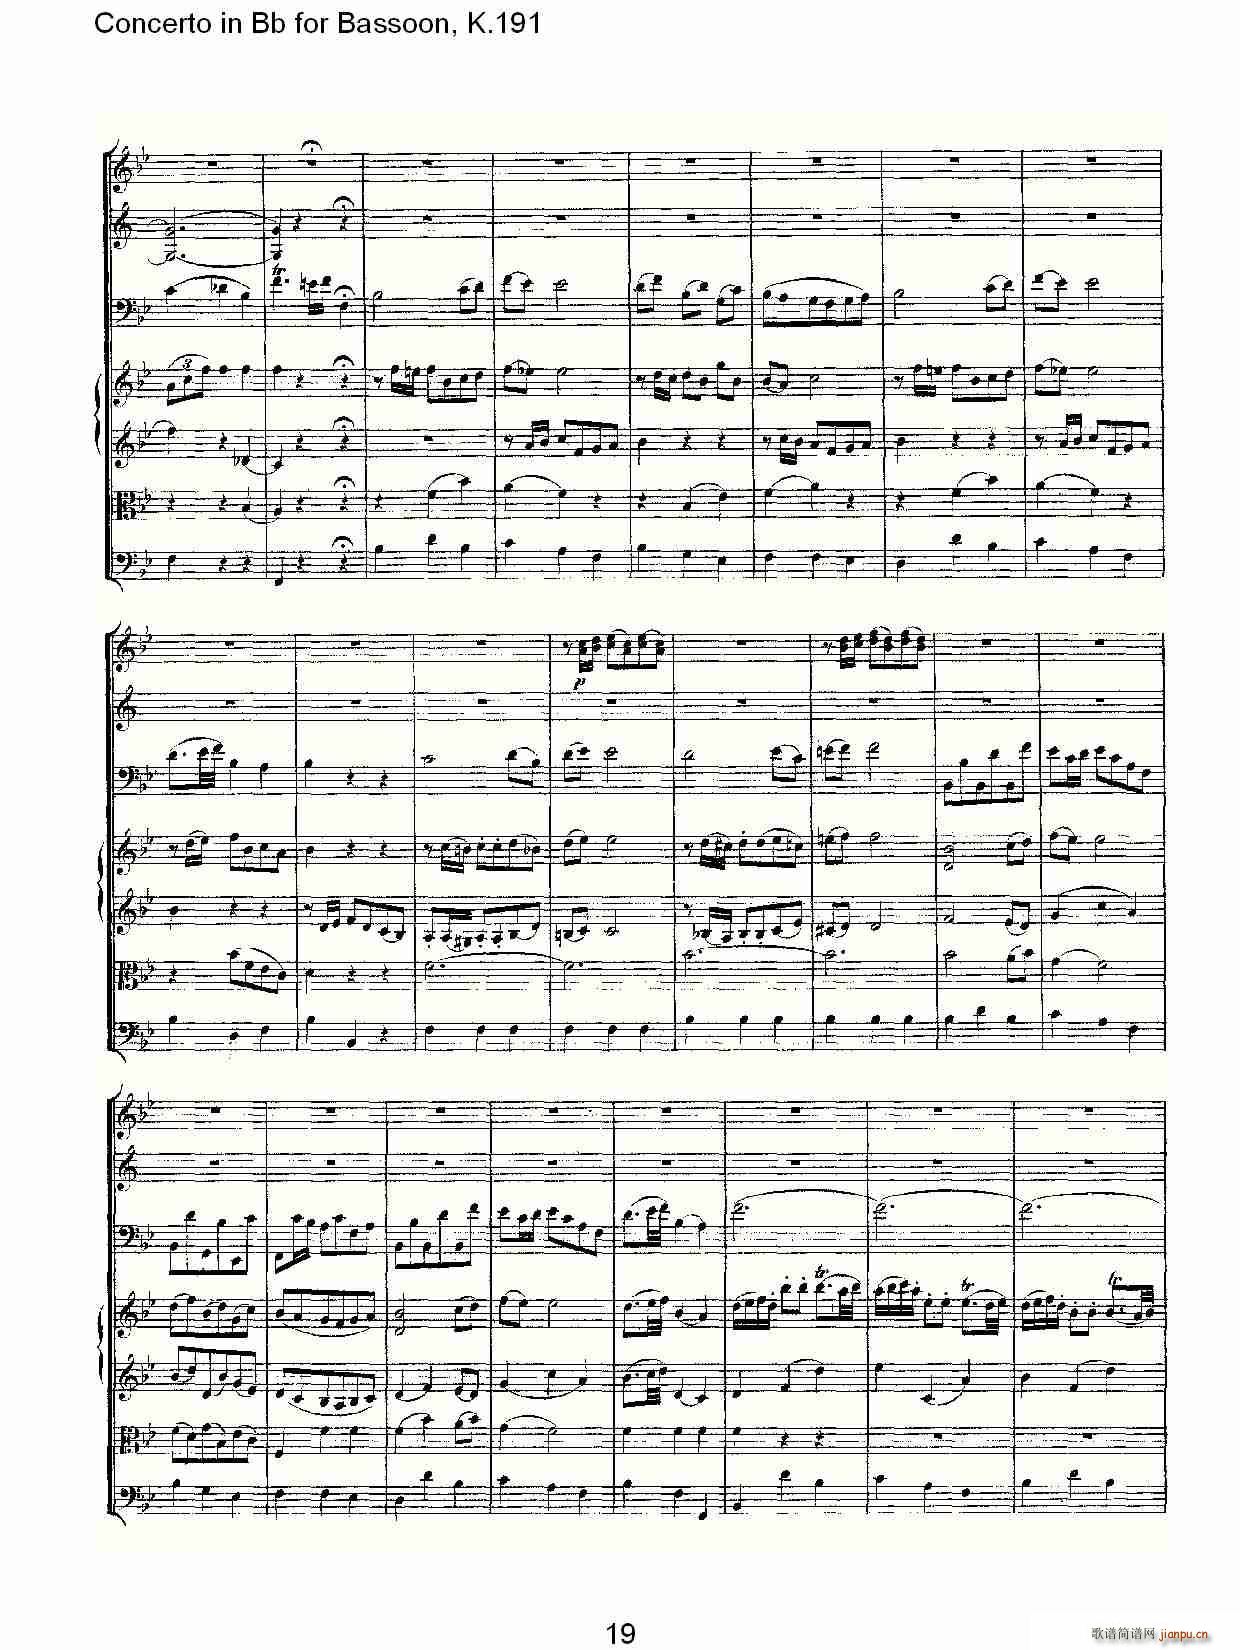 Concerto in Bb for Bassoon, K.191(ʮּ)20